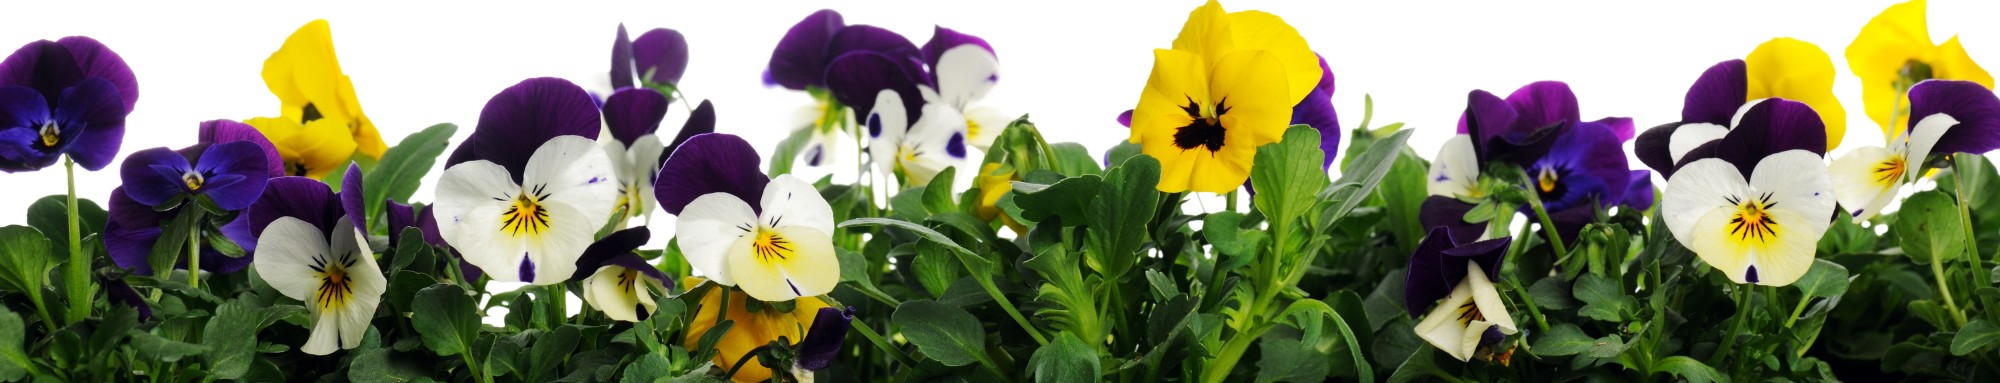 Pansies and Sun Catchers on Saturday, April 18, at 11:00.